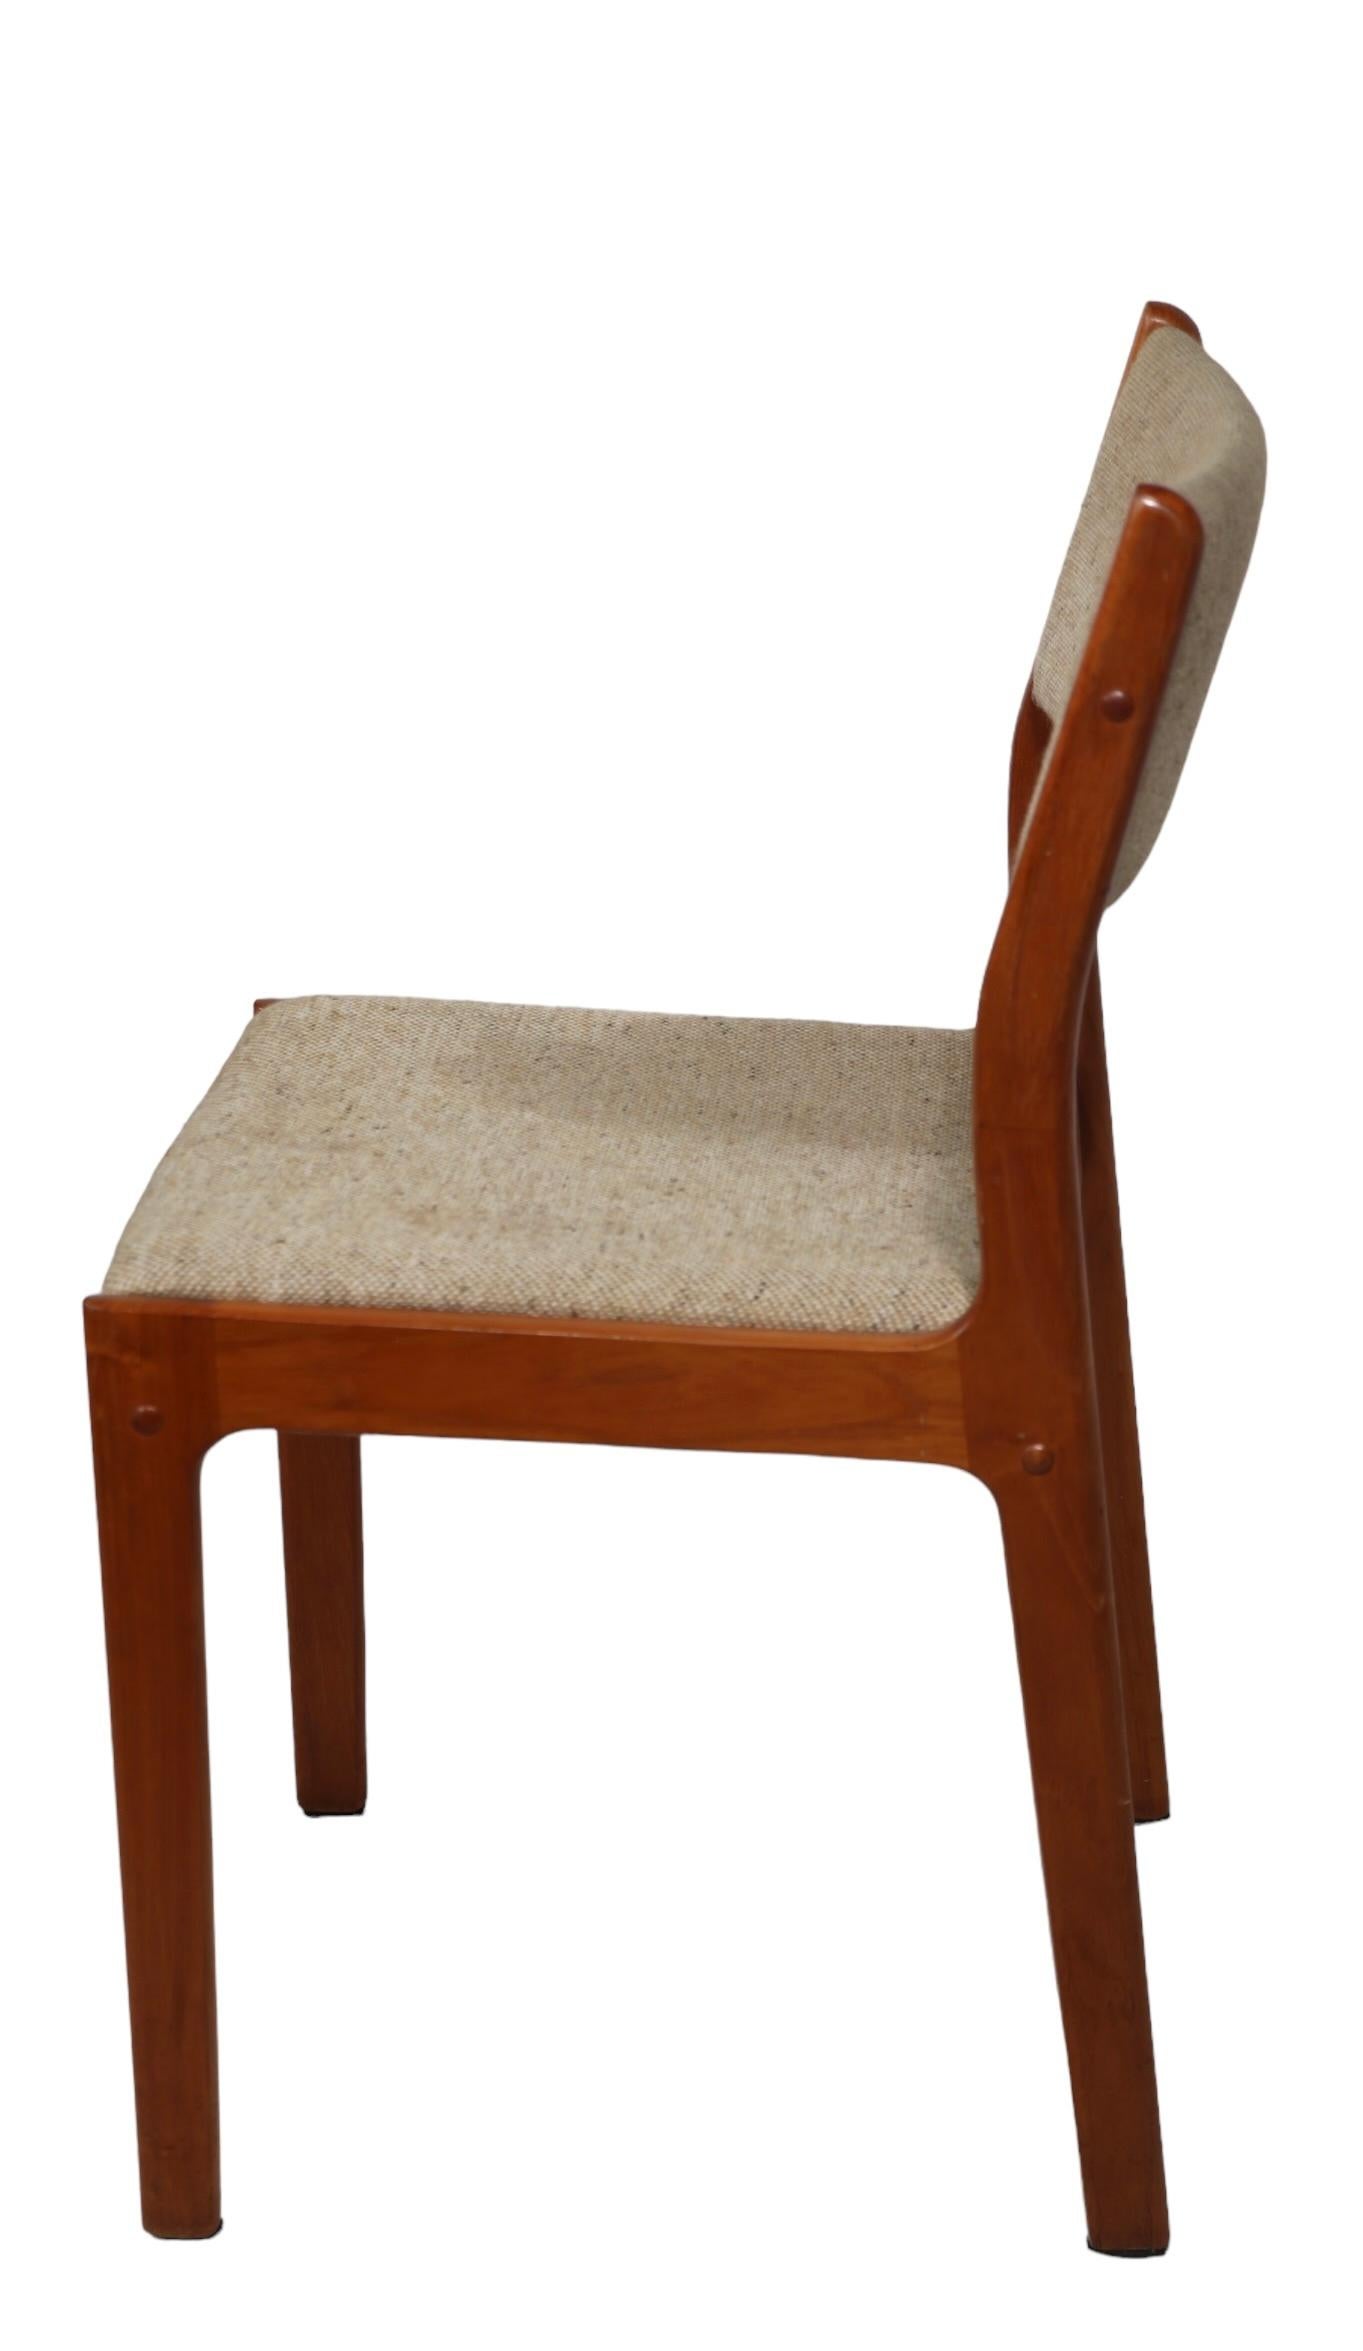 20th Century Four Teak  Danish Style Mid Century Dining Chairs by D Scan c 1950/1960's  For Sale